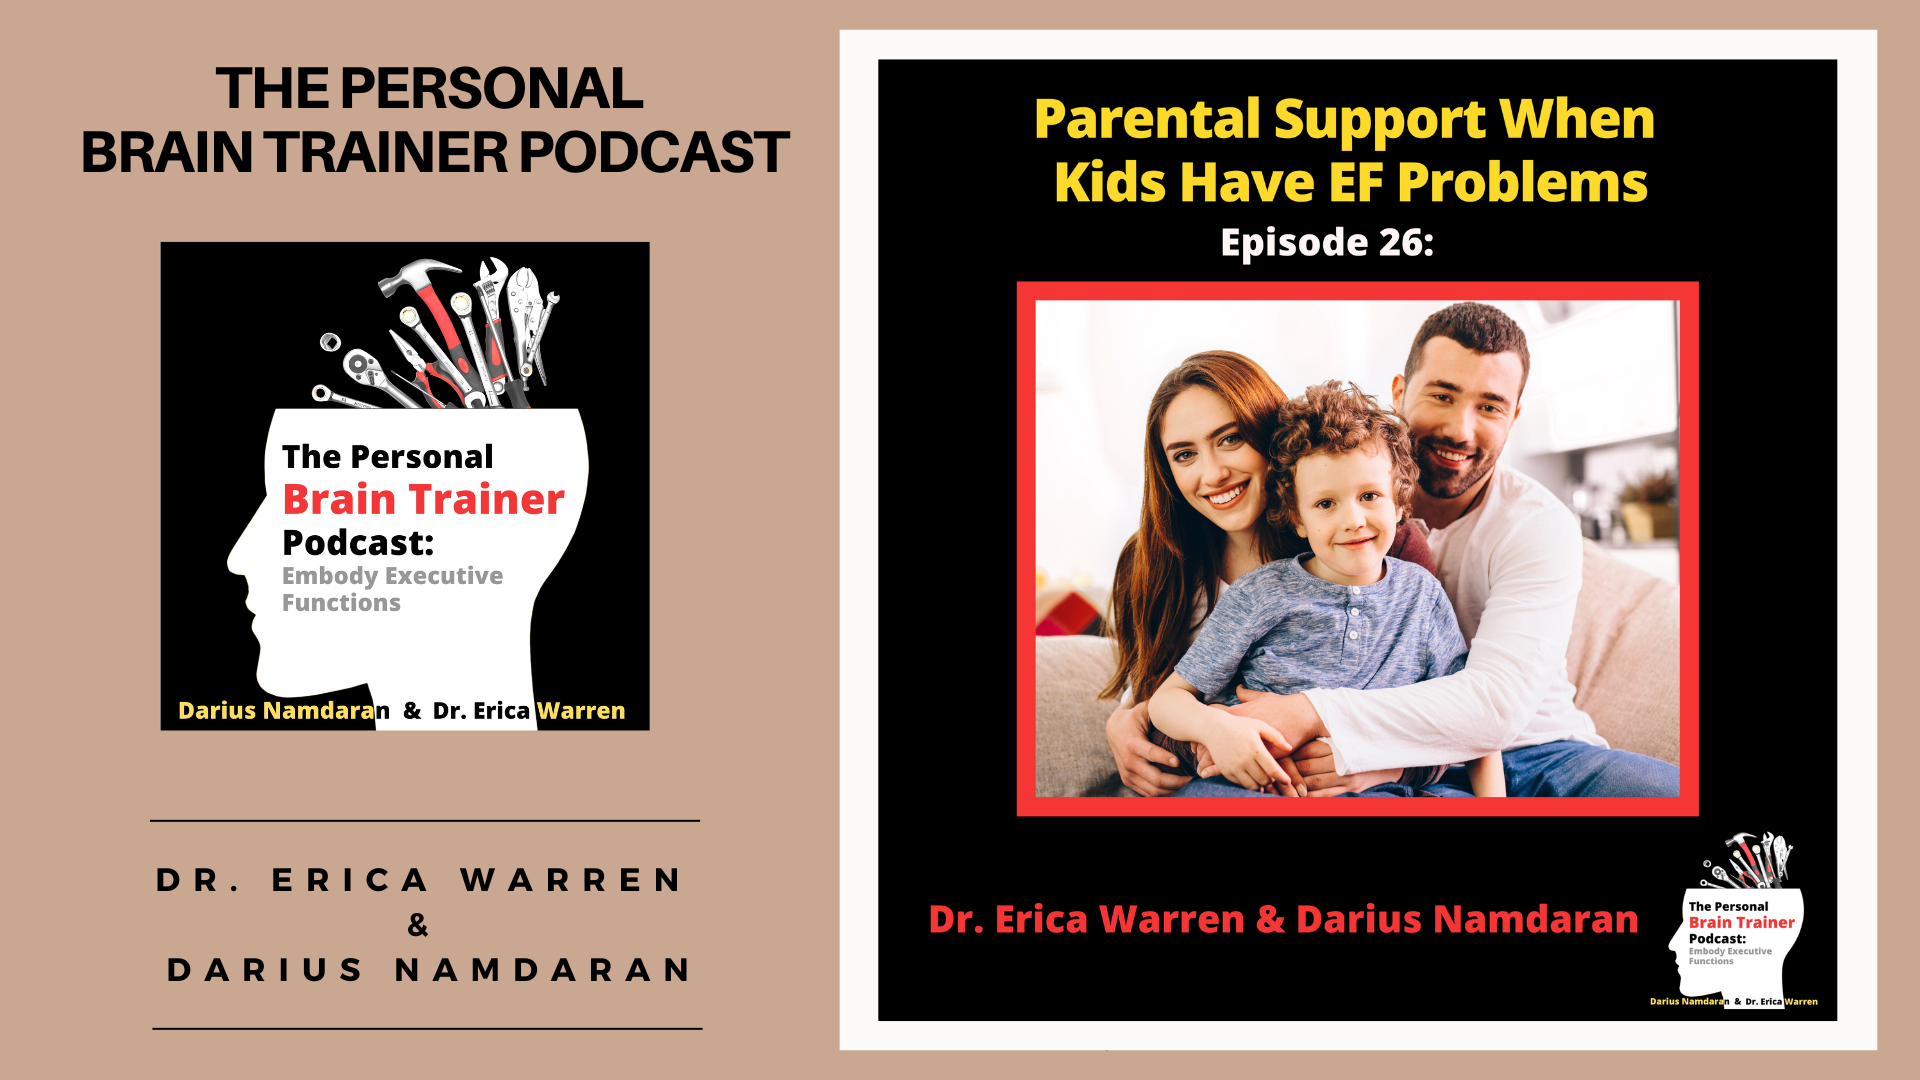 happy family podcast about kids with EF problems